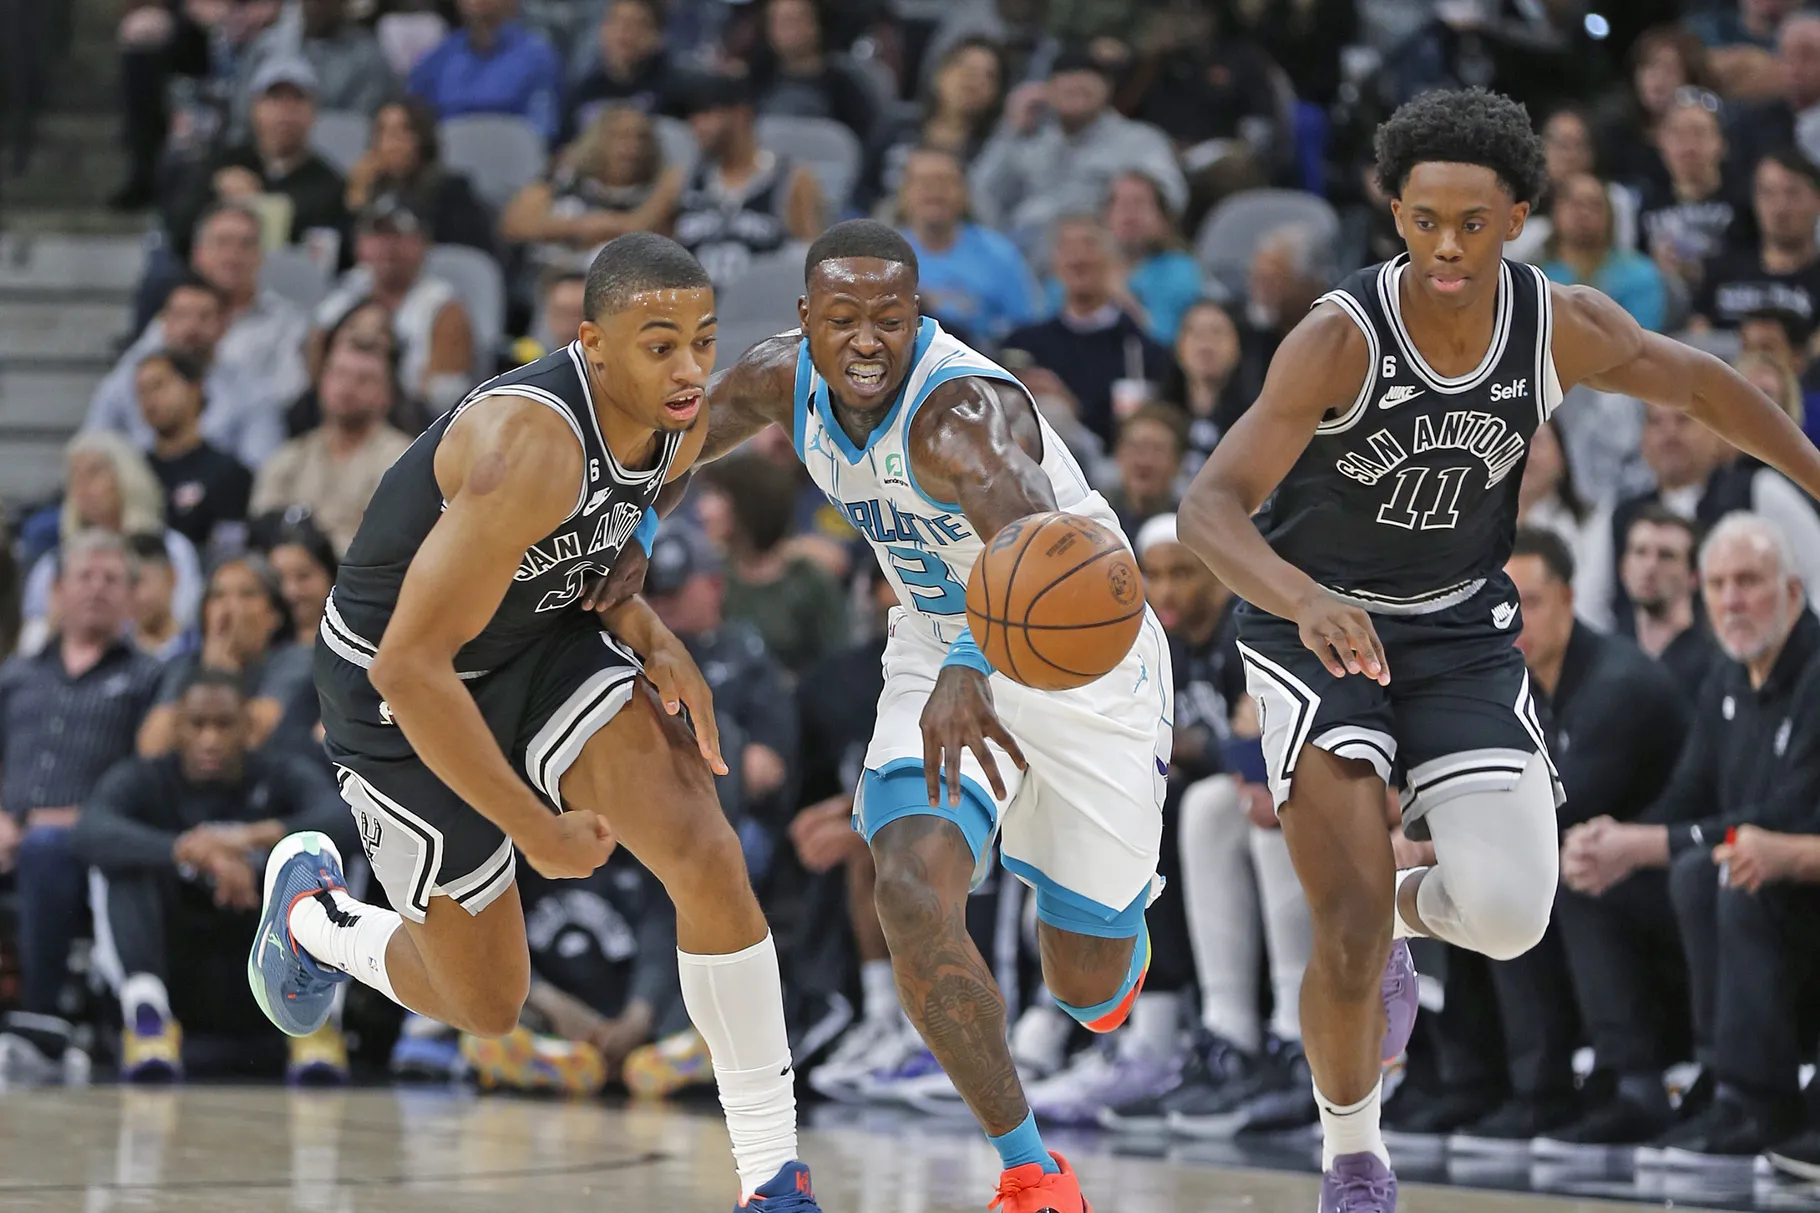 Spurs and Hornets players rush to a loose ball